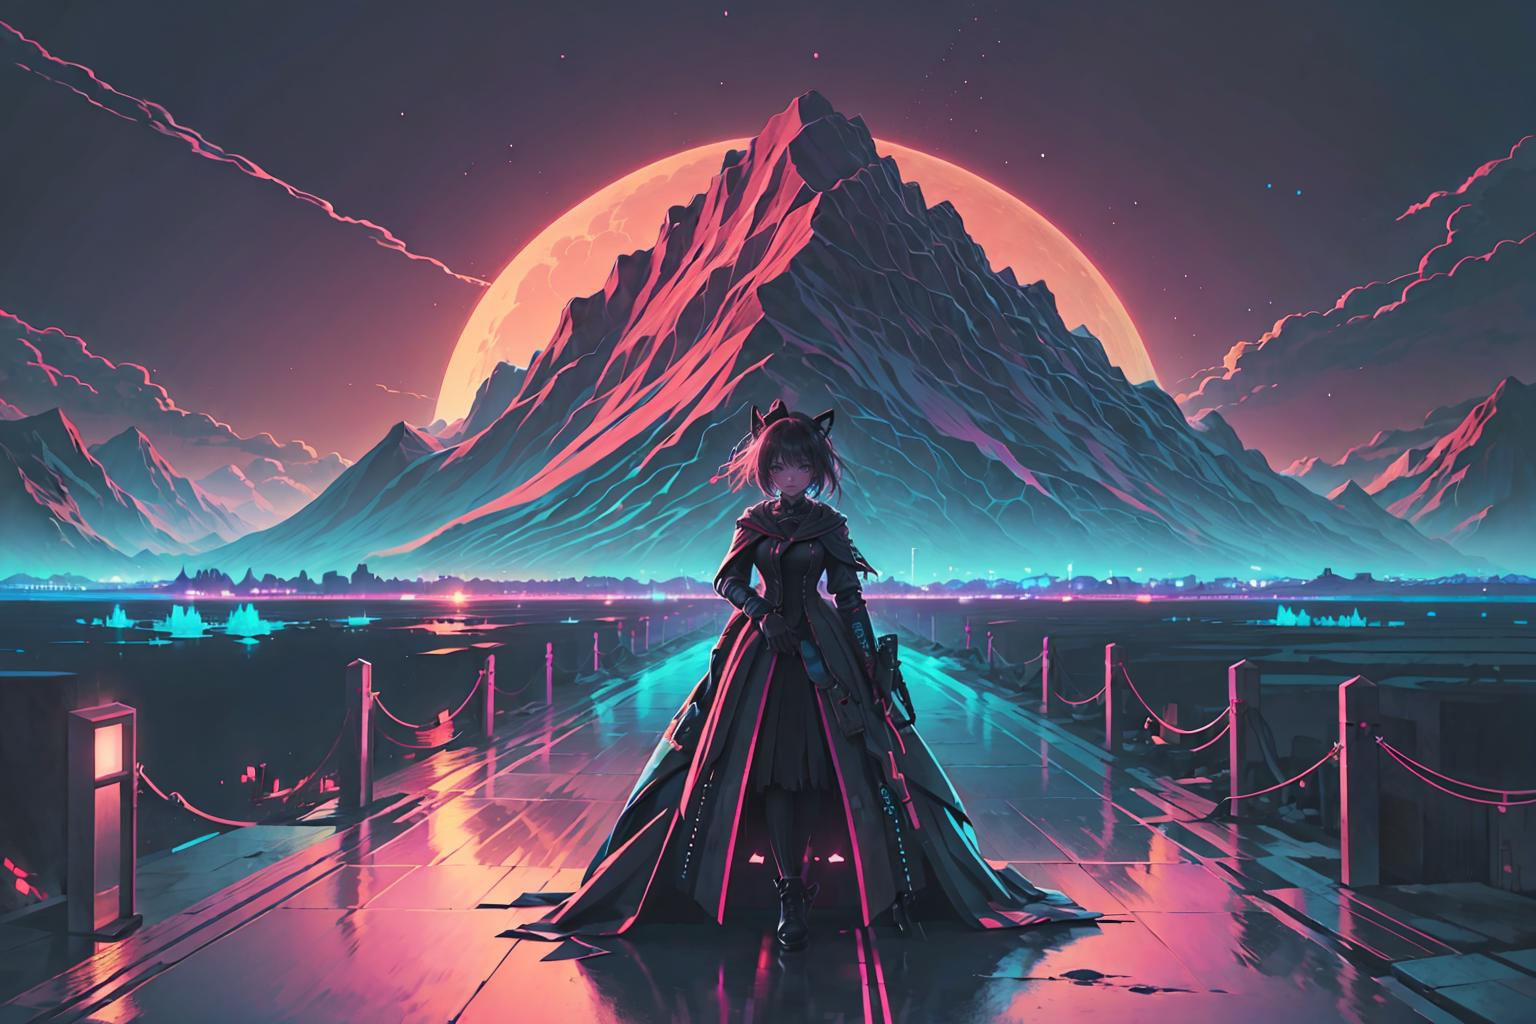 Retrowave image by pizzagirl